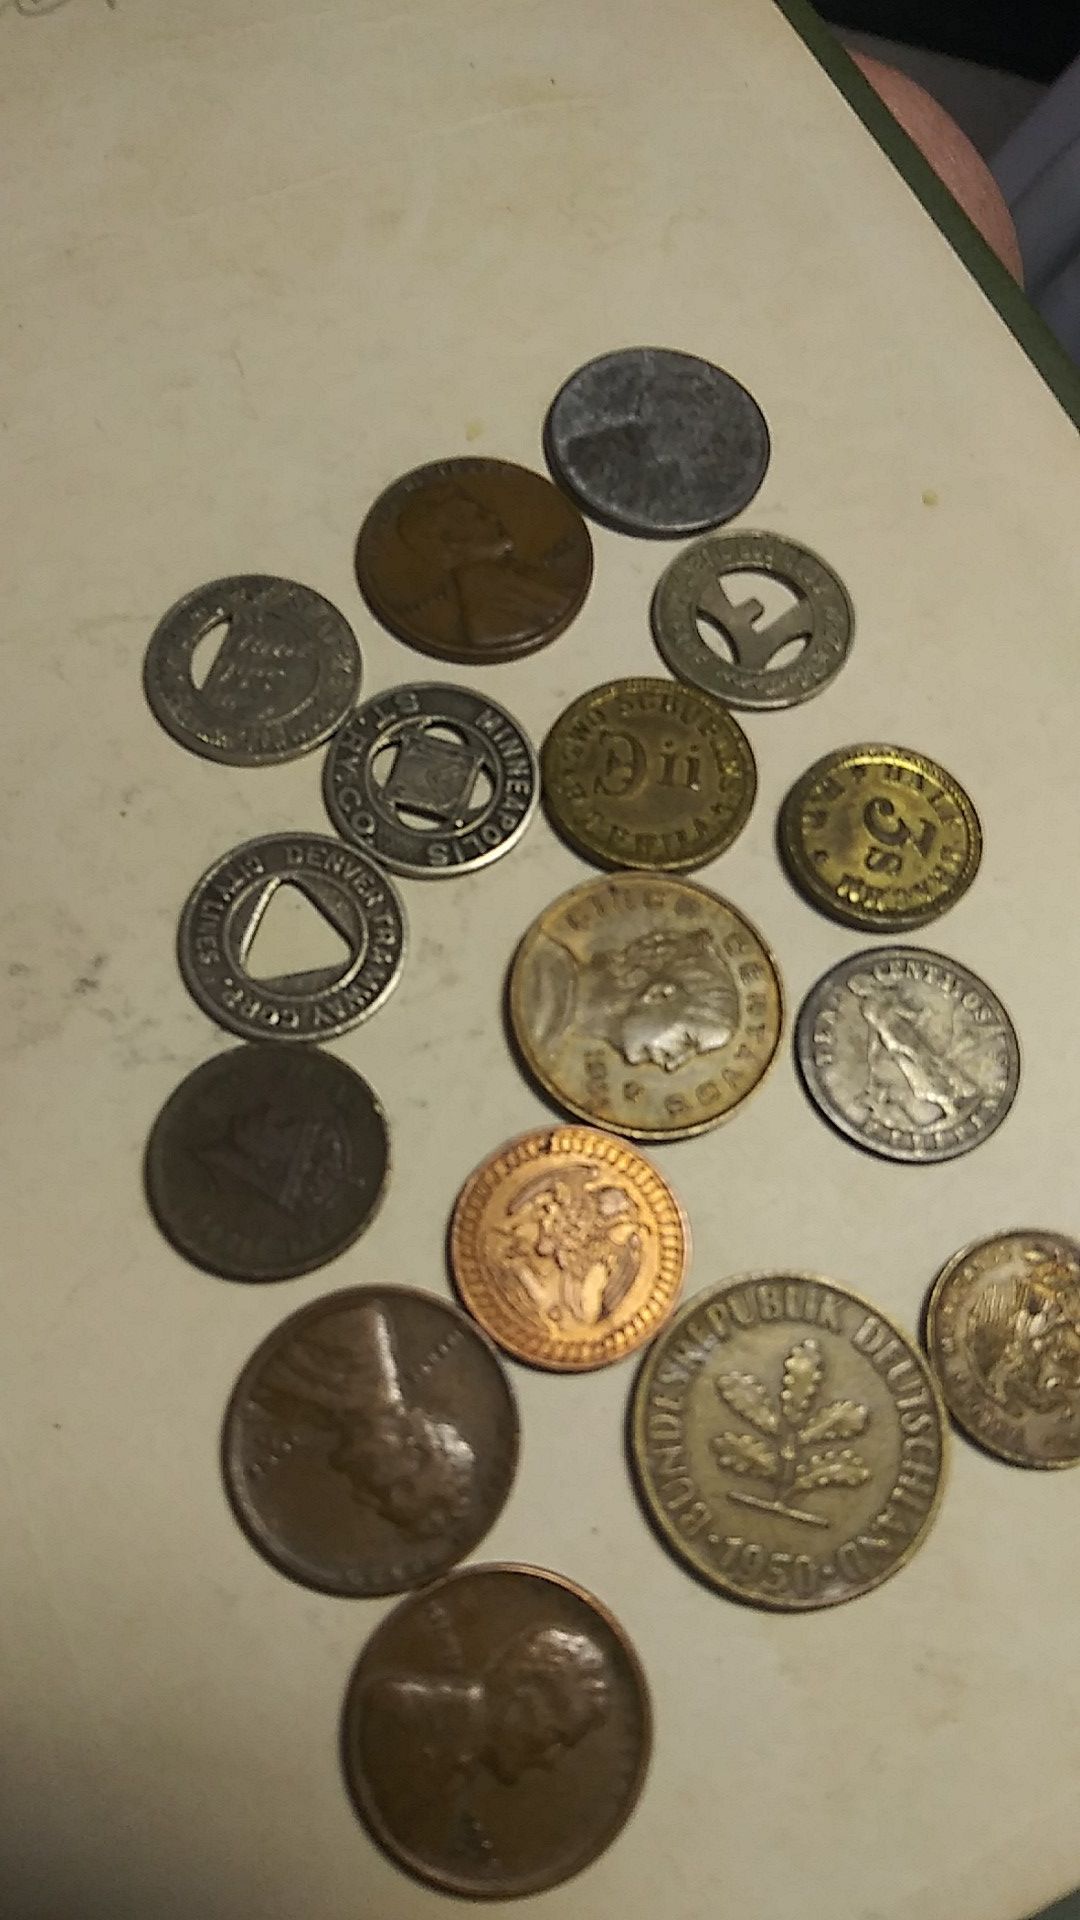 Vintage antique tokens and coins